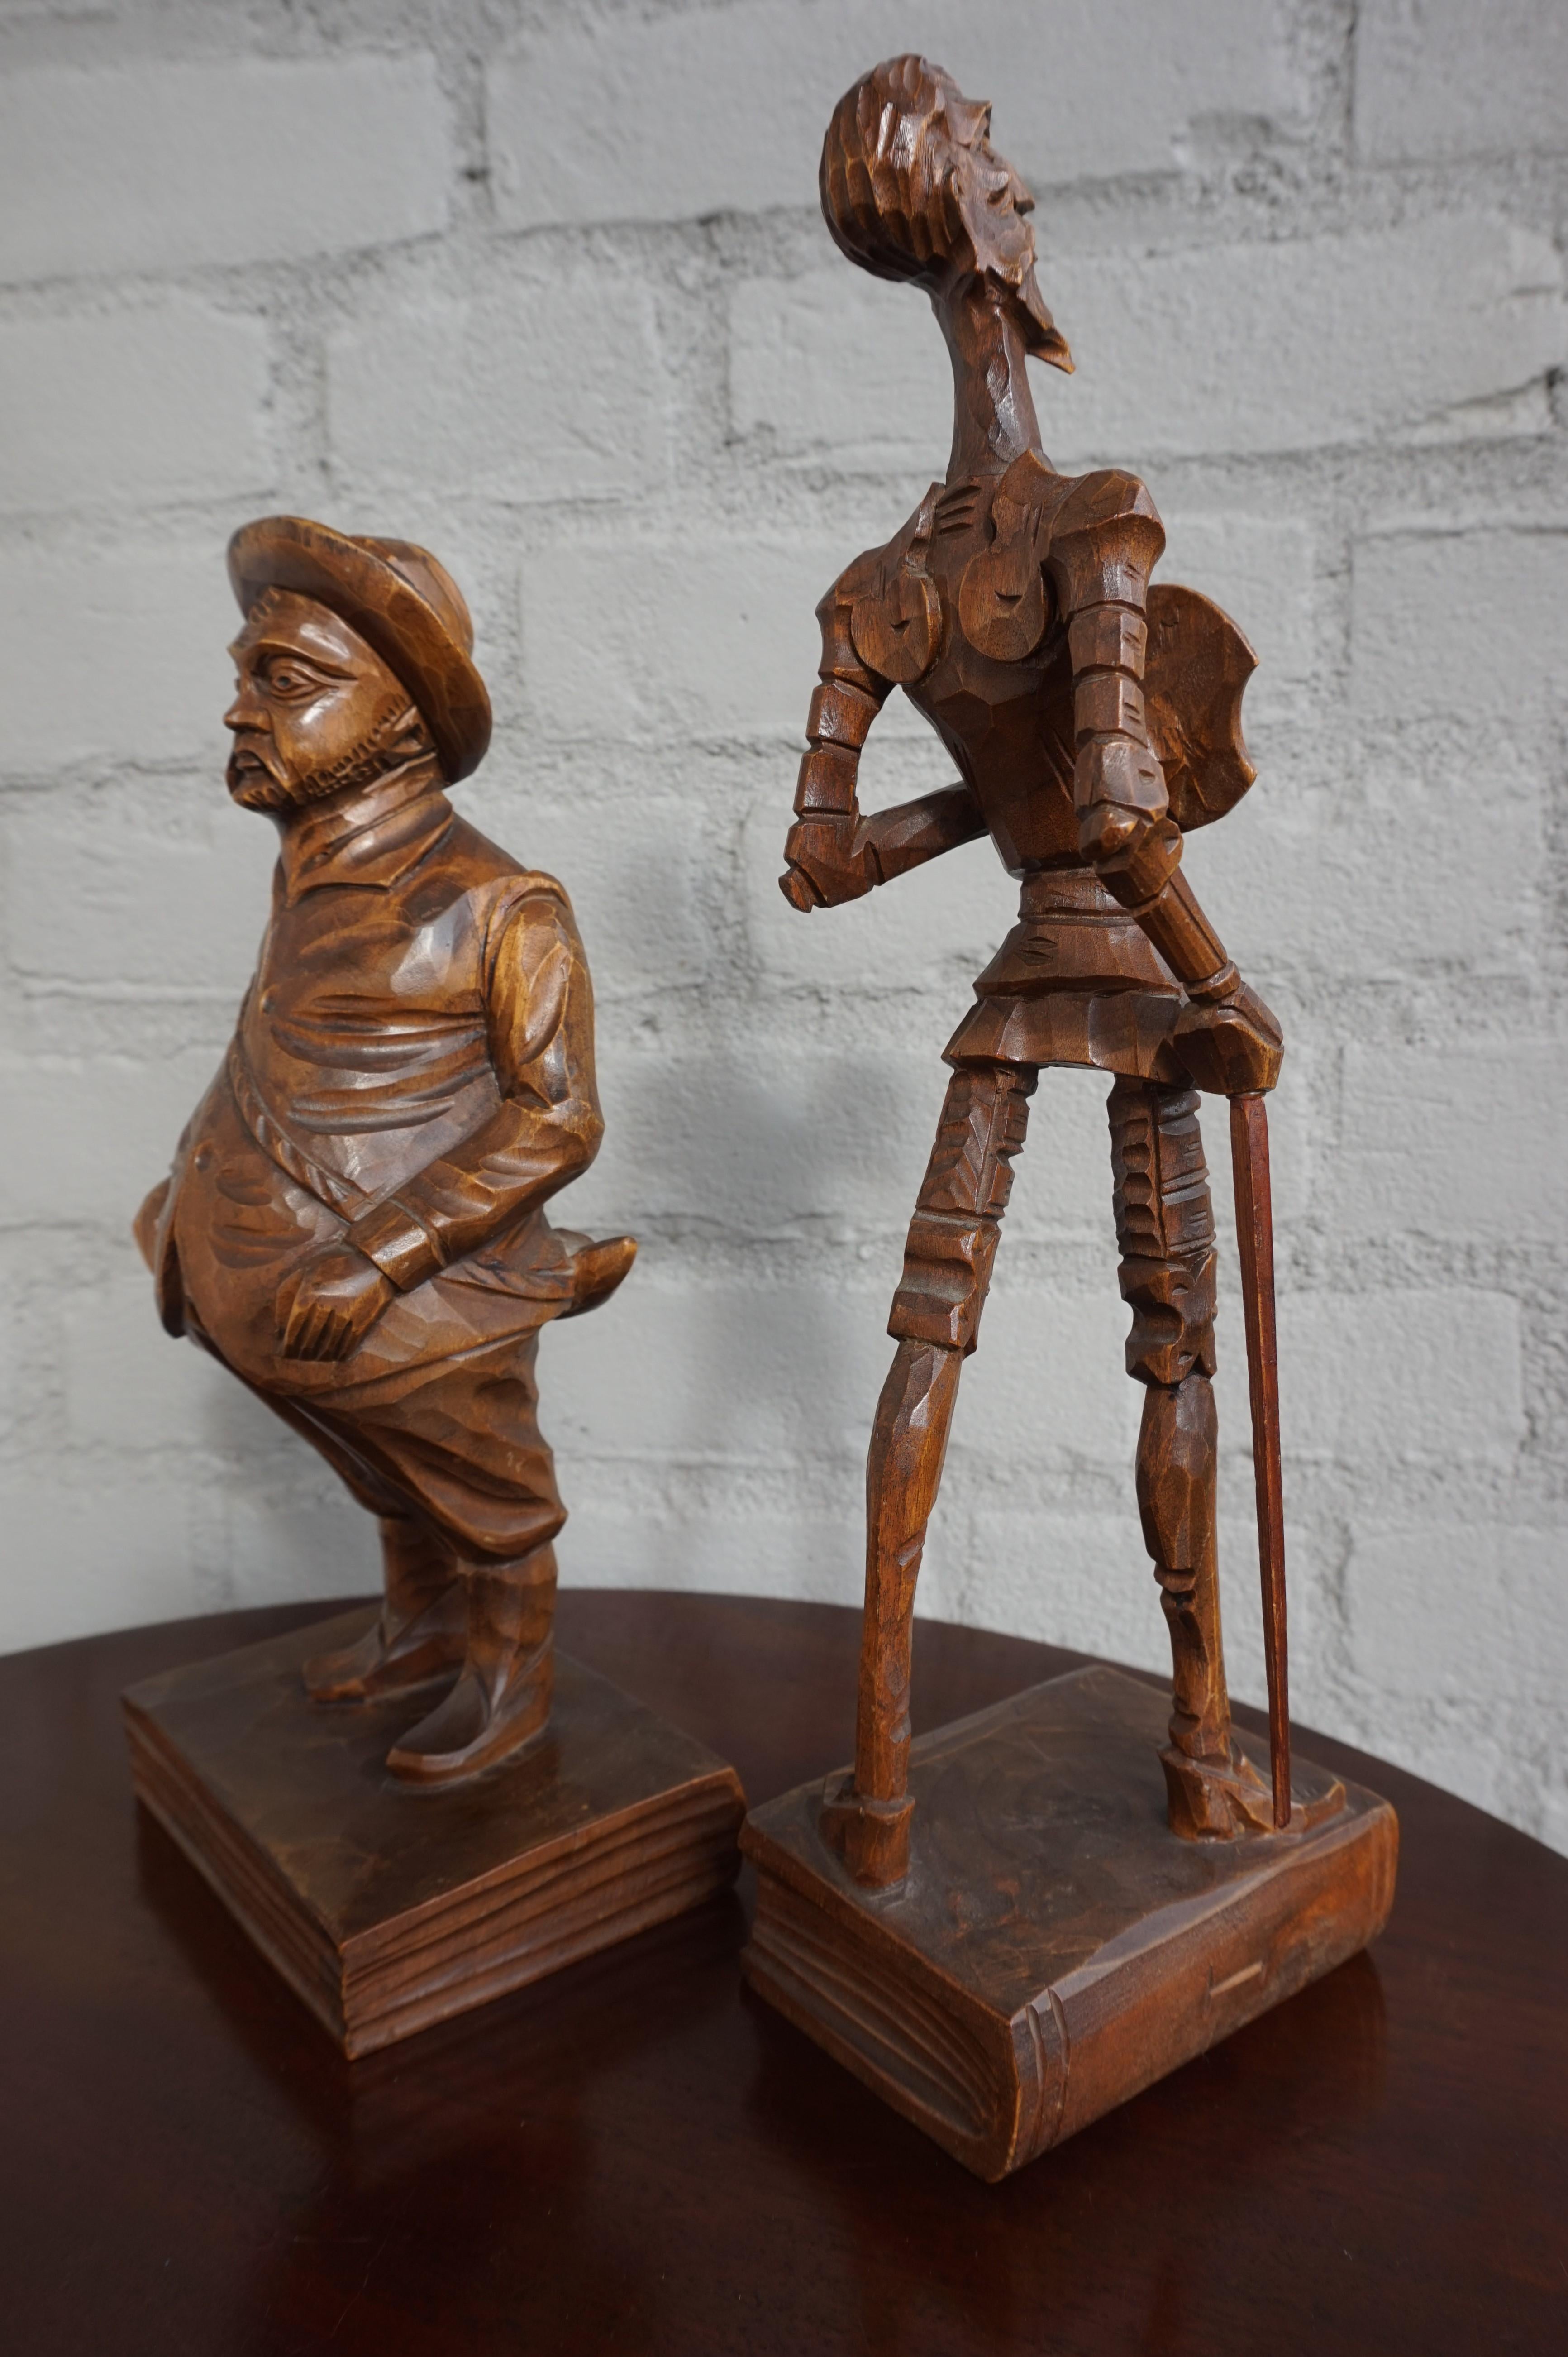 European Hand Carved Don Quixote and Sancho Panza Sculptures from the Arts & Crafts Era